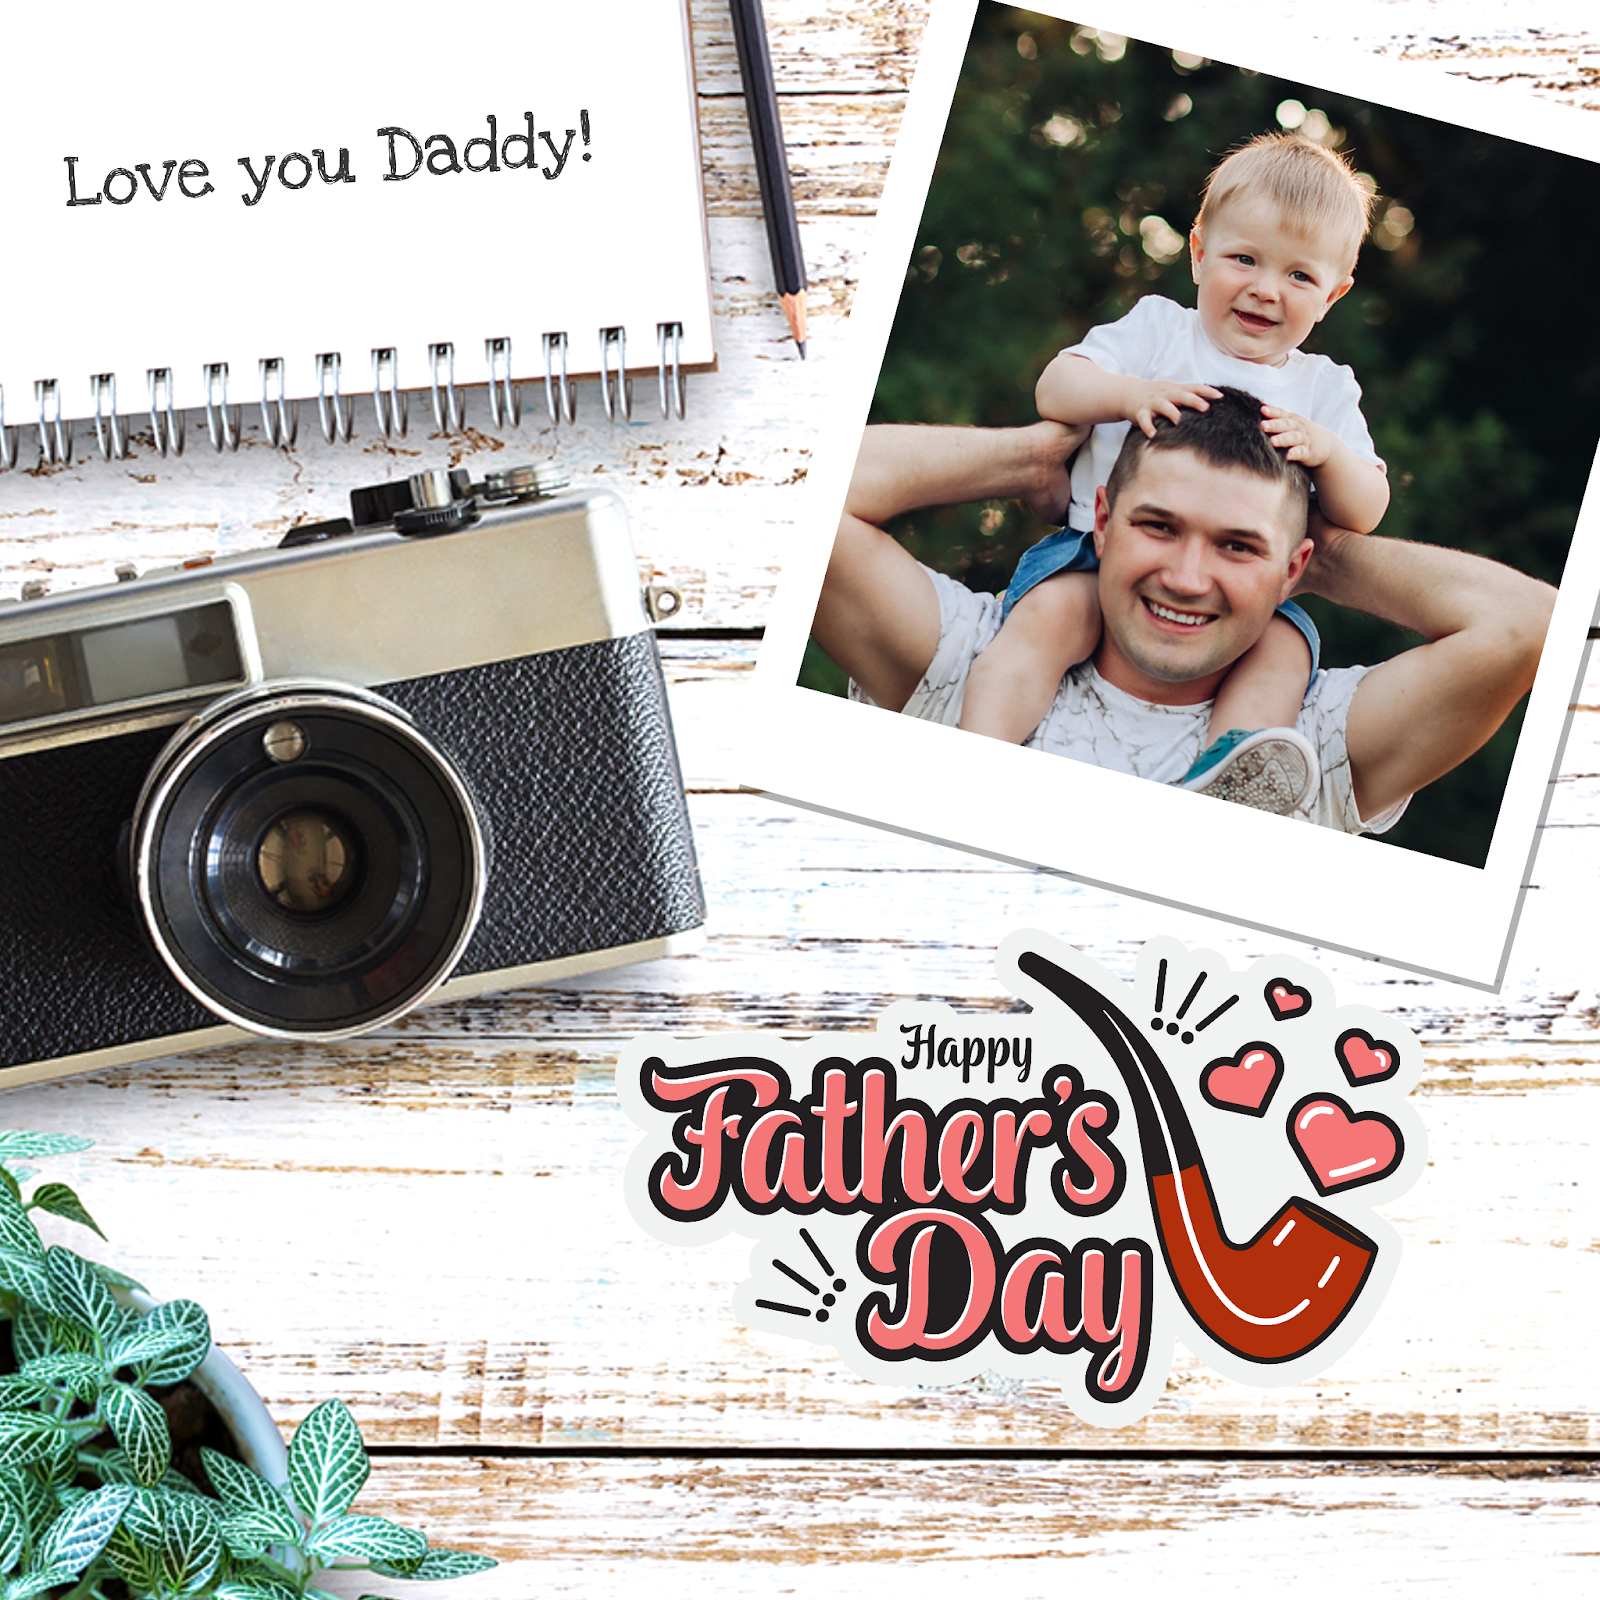 Instagram Post designed with Father's Day Sticker